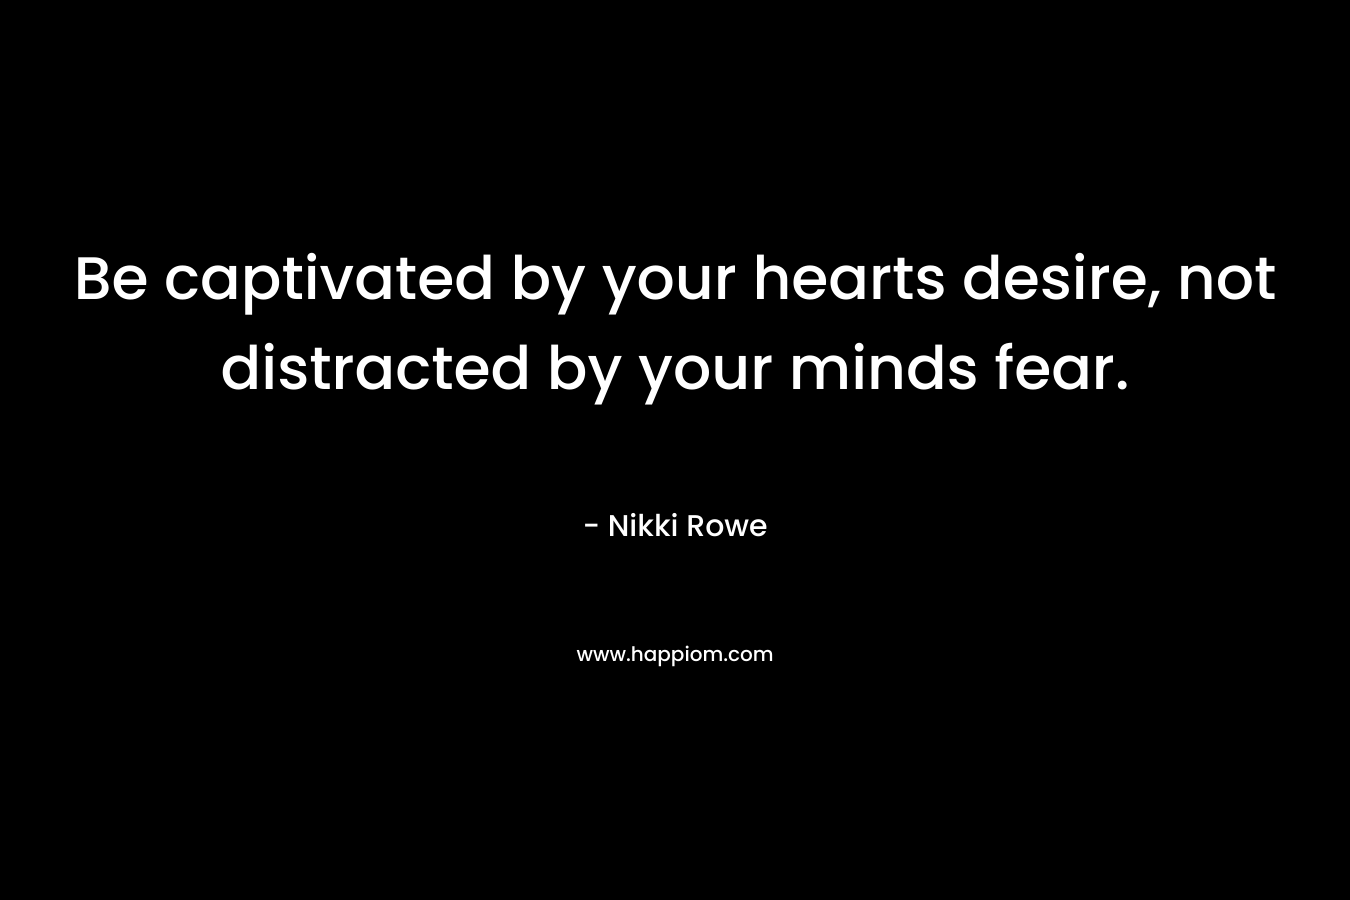 Be captivated by your hearts desire, not distracted by your minds fear. – Nikki Rowe